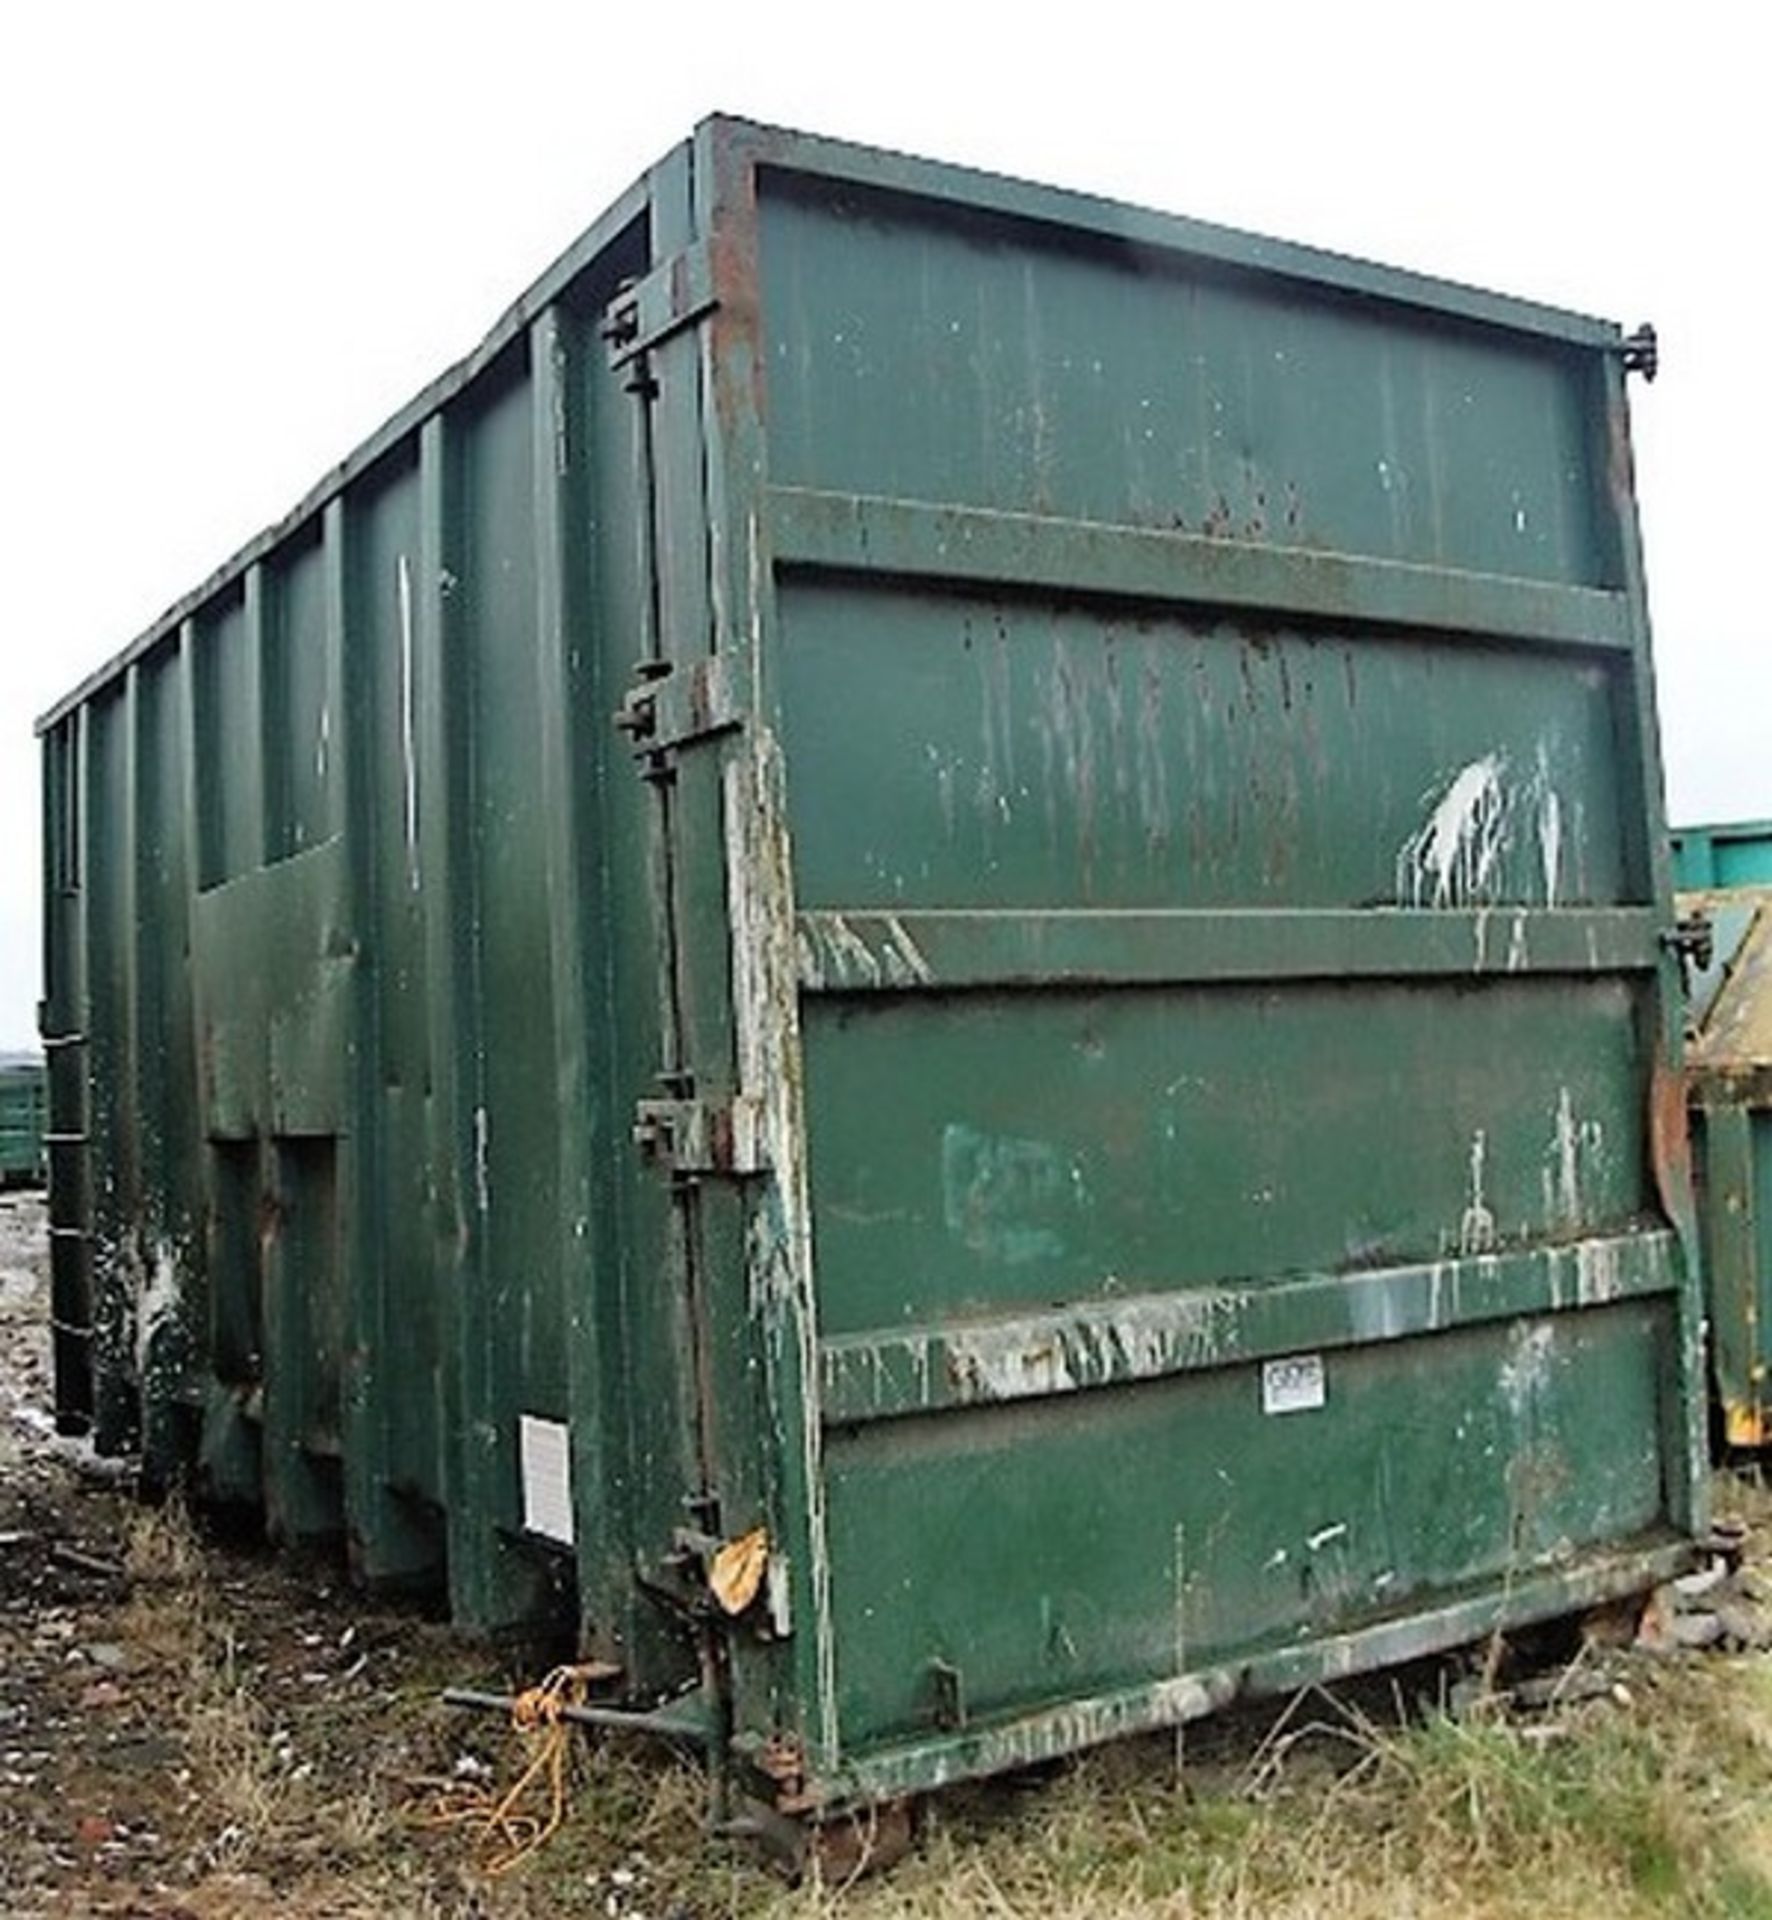 EXTRA HIGH OPEN TOP SKIP. C/W ACCESS LADDER. SOLD FROM ERROL AUCTION SITE. VIEWING AND UPLIFT FROM L - Image 4 of 4